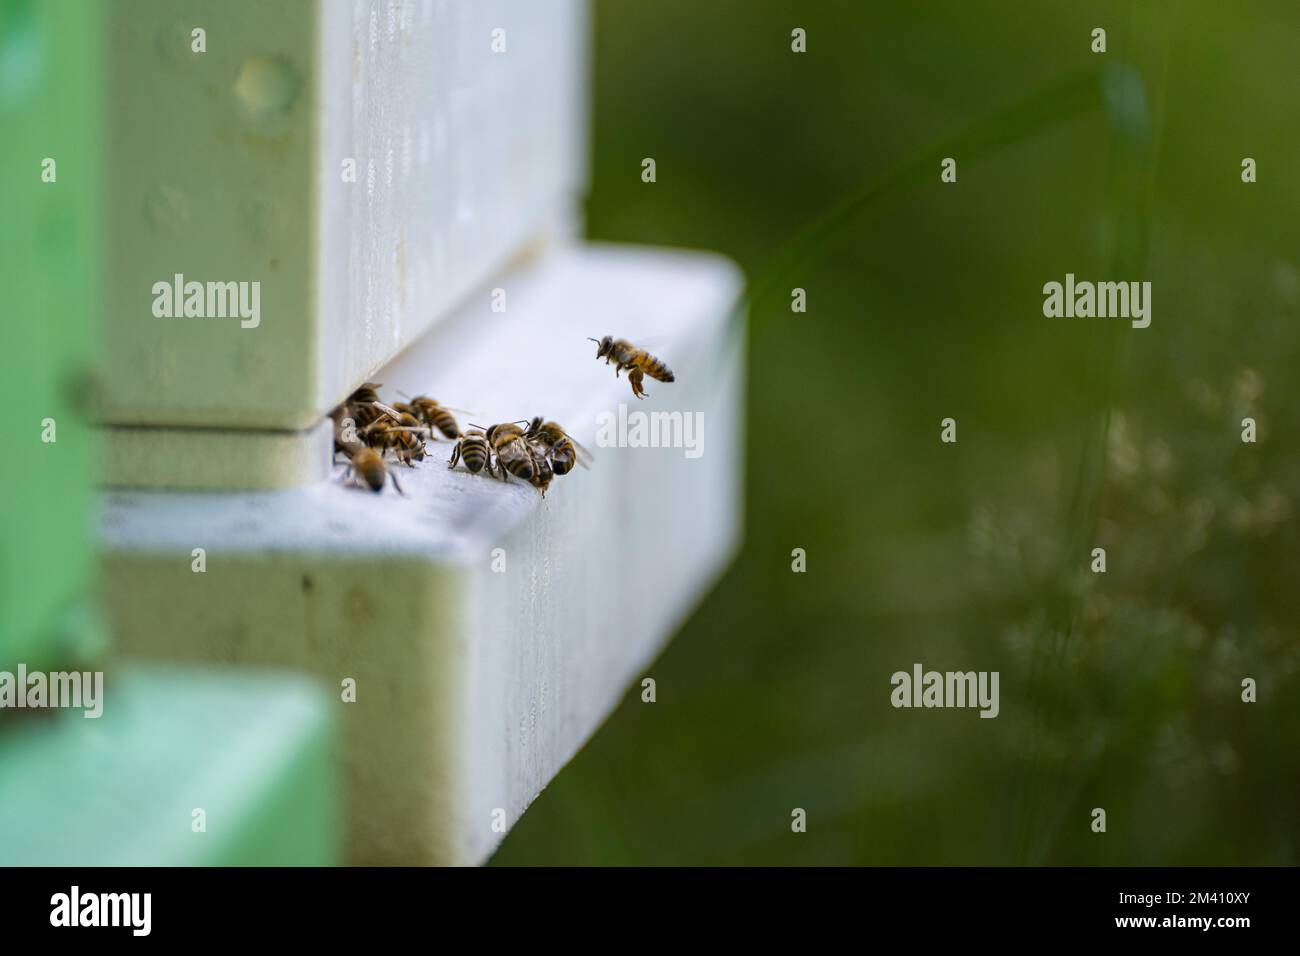 A closeup of a hive of bees perched on a wooden langstroth Stock Photo